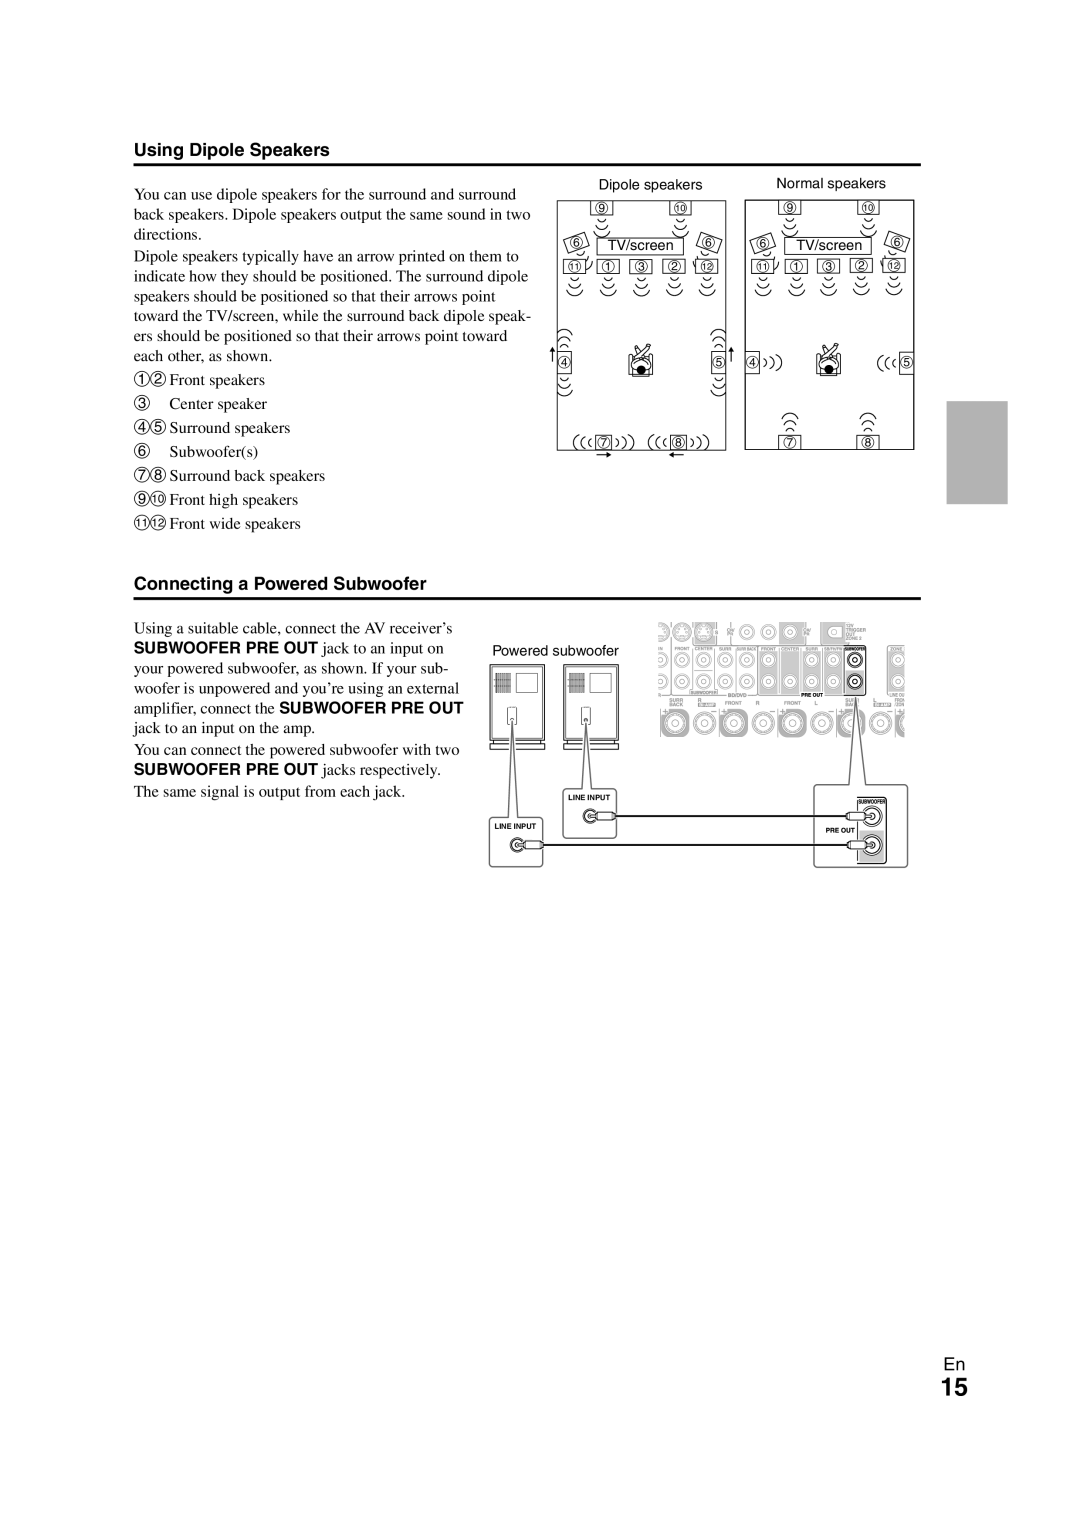 Onkyo TX-NR708 instruction manual Using Dipole Speakers, Connecting a Powered Subwoofer 